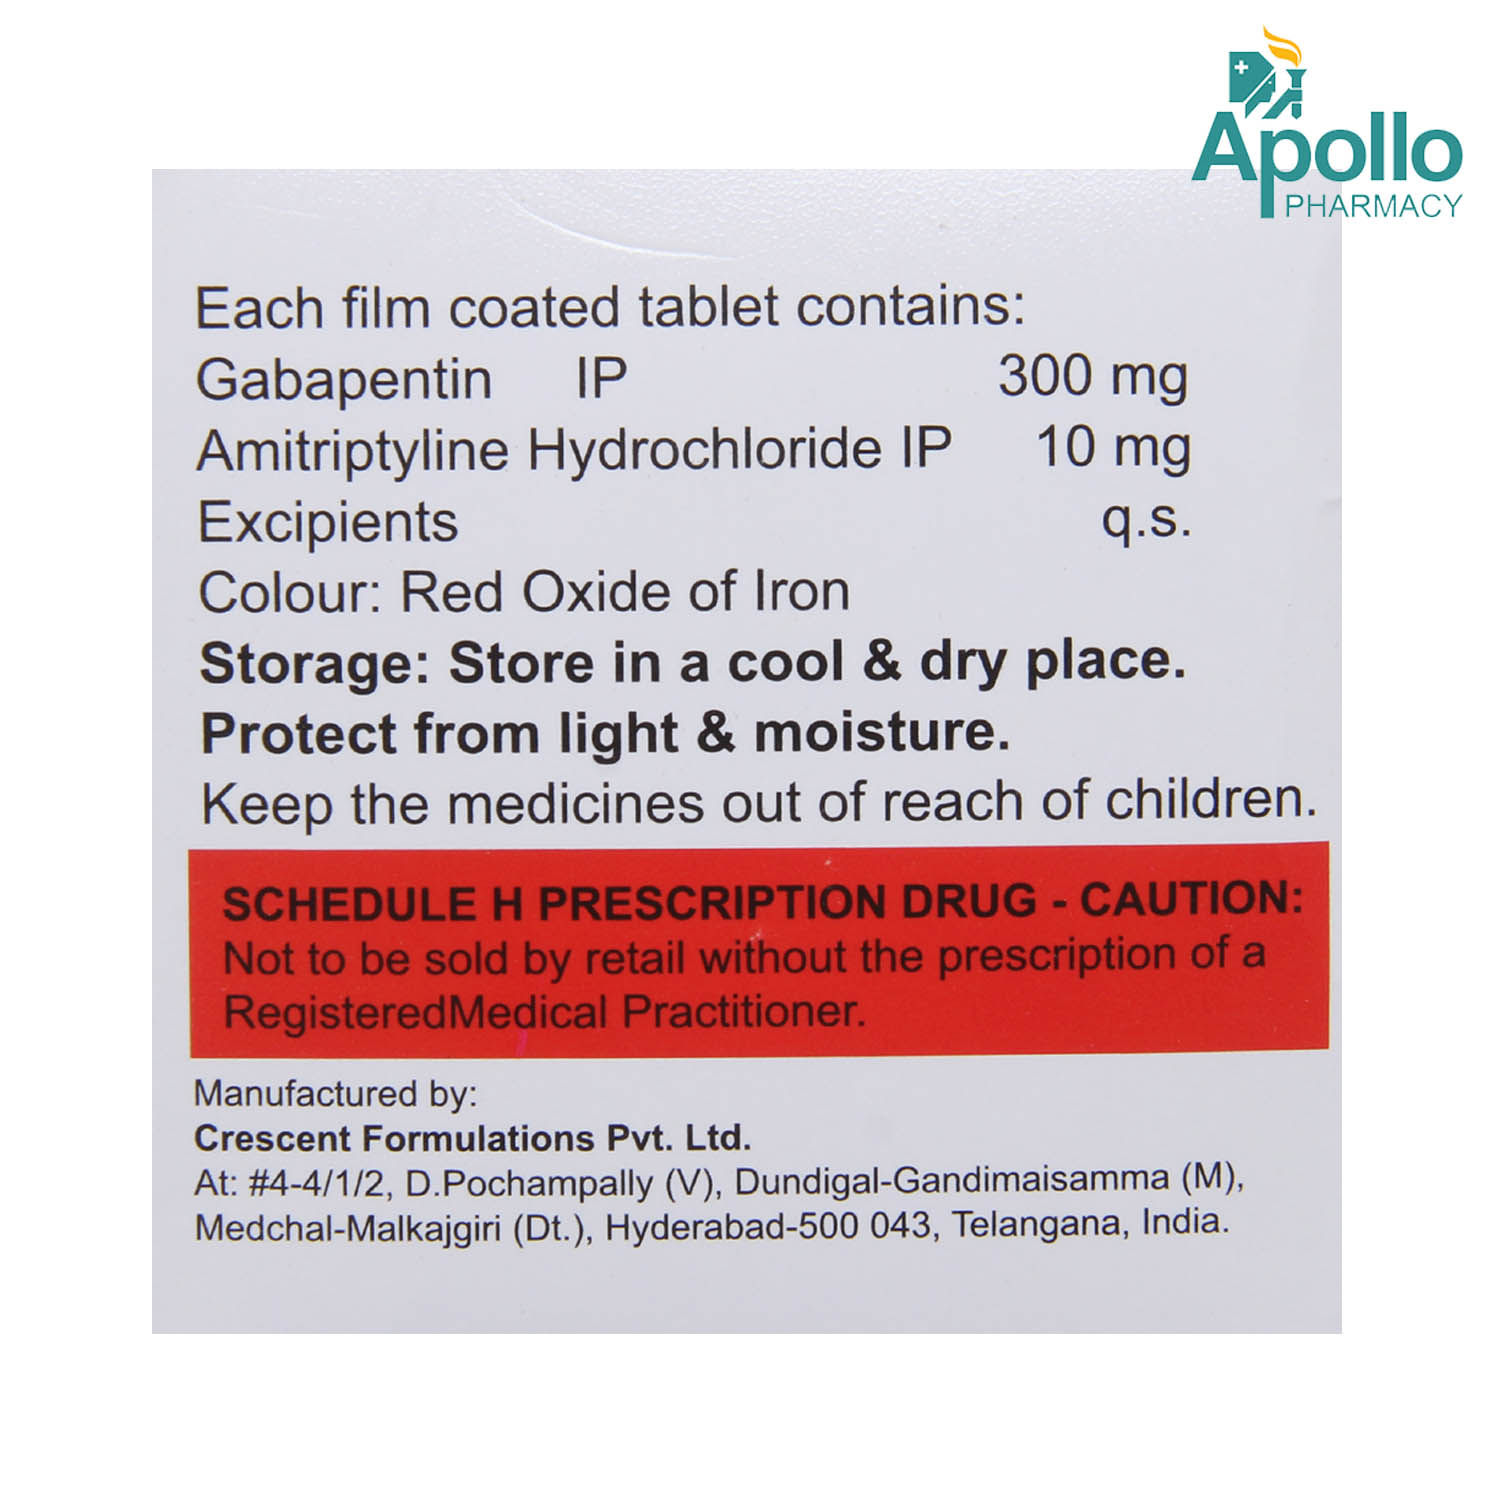 Amigatin Tablet Price Uses Side Effects Composition Apollo Pharmacy